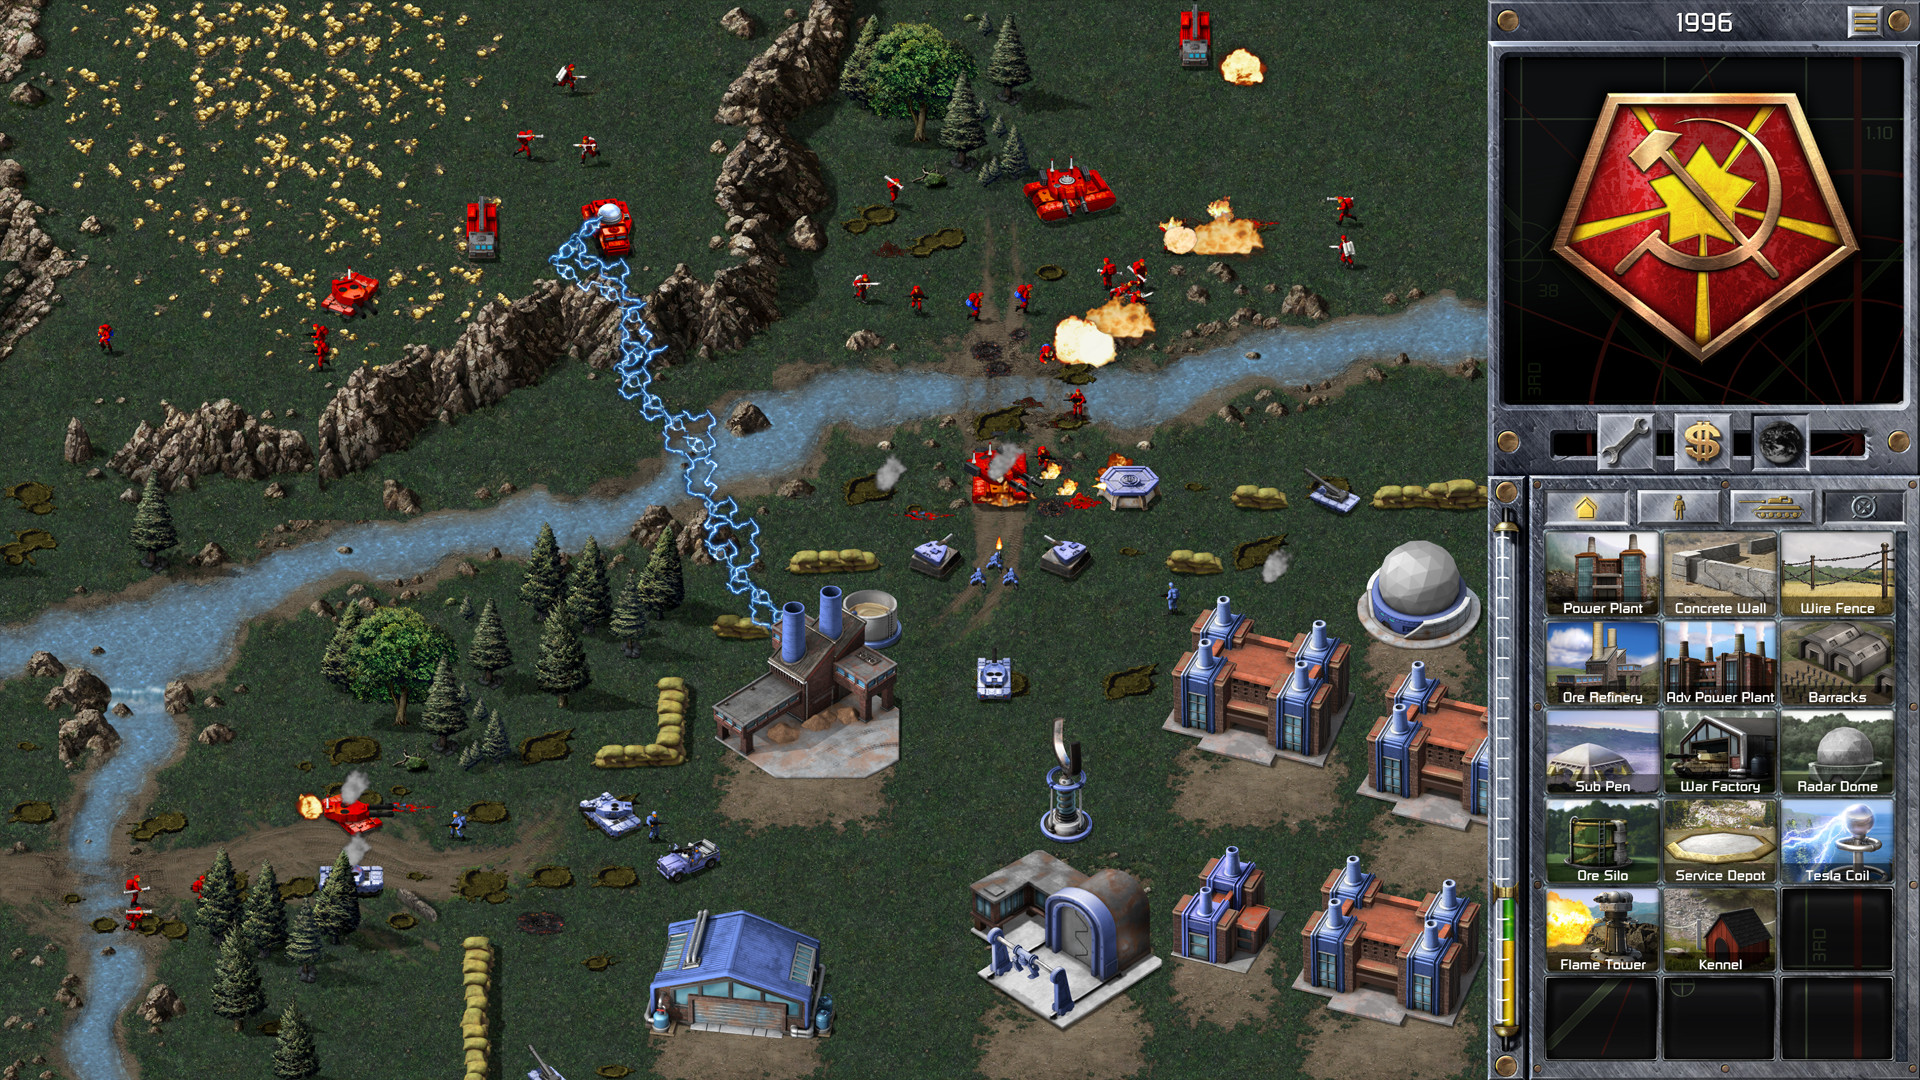 Save 60% on Command & Conquer™ Remastered Collection on Steam